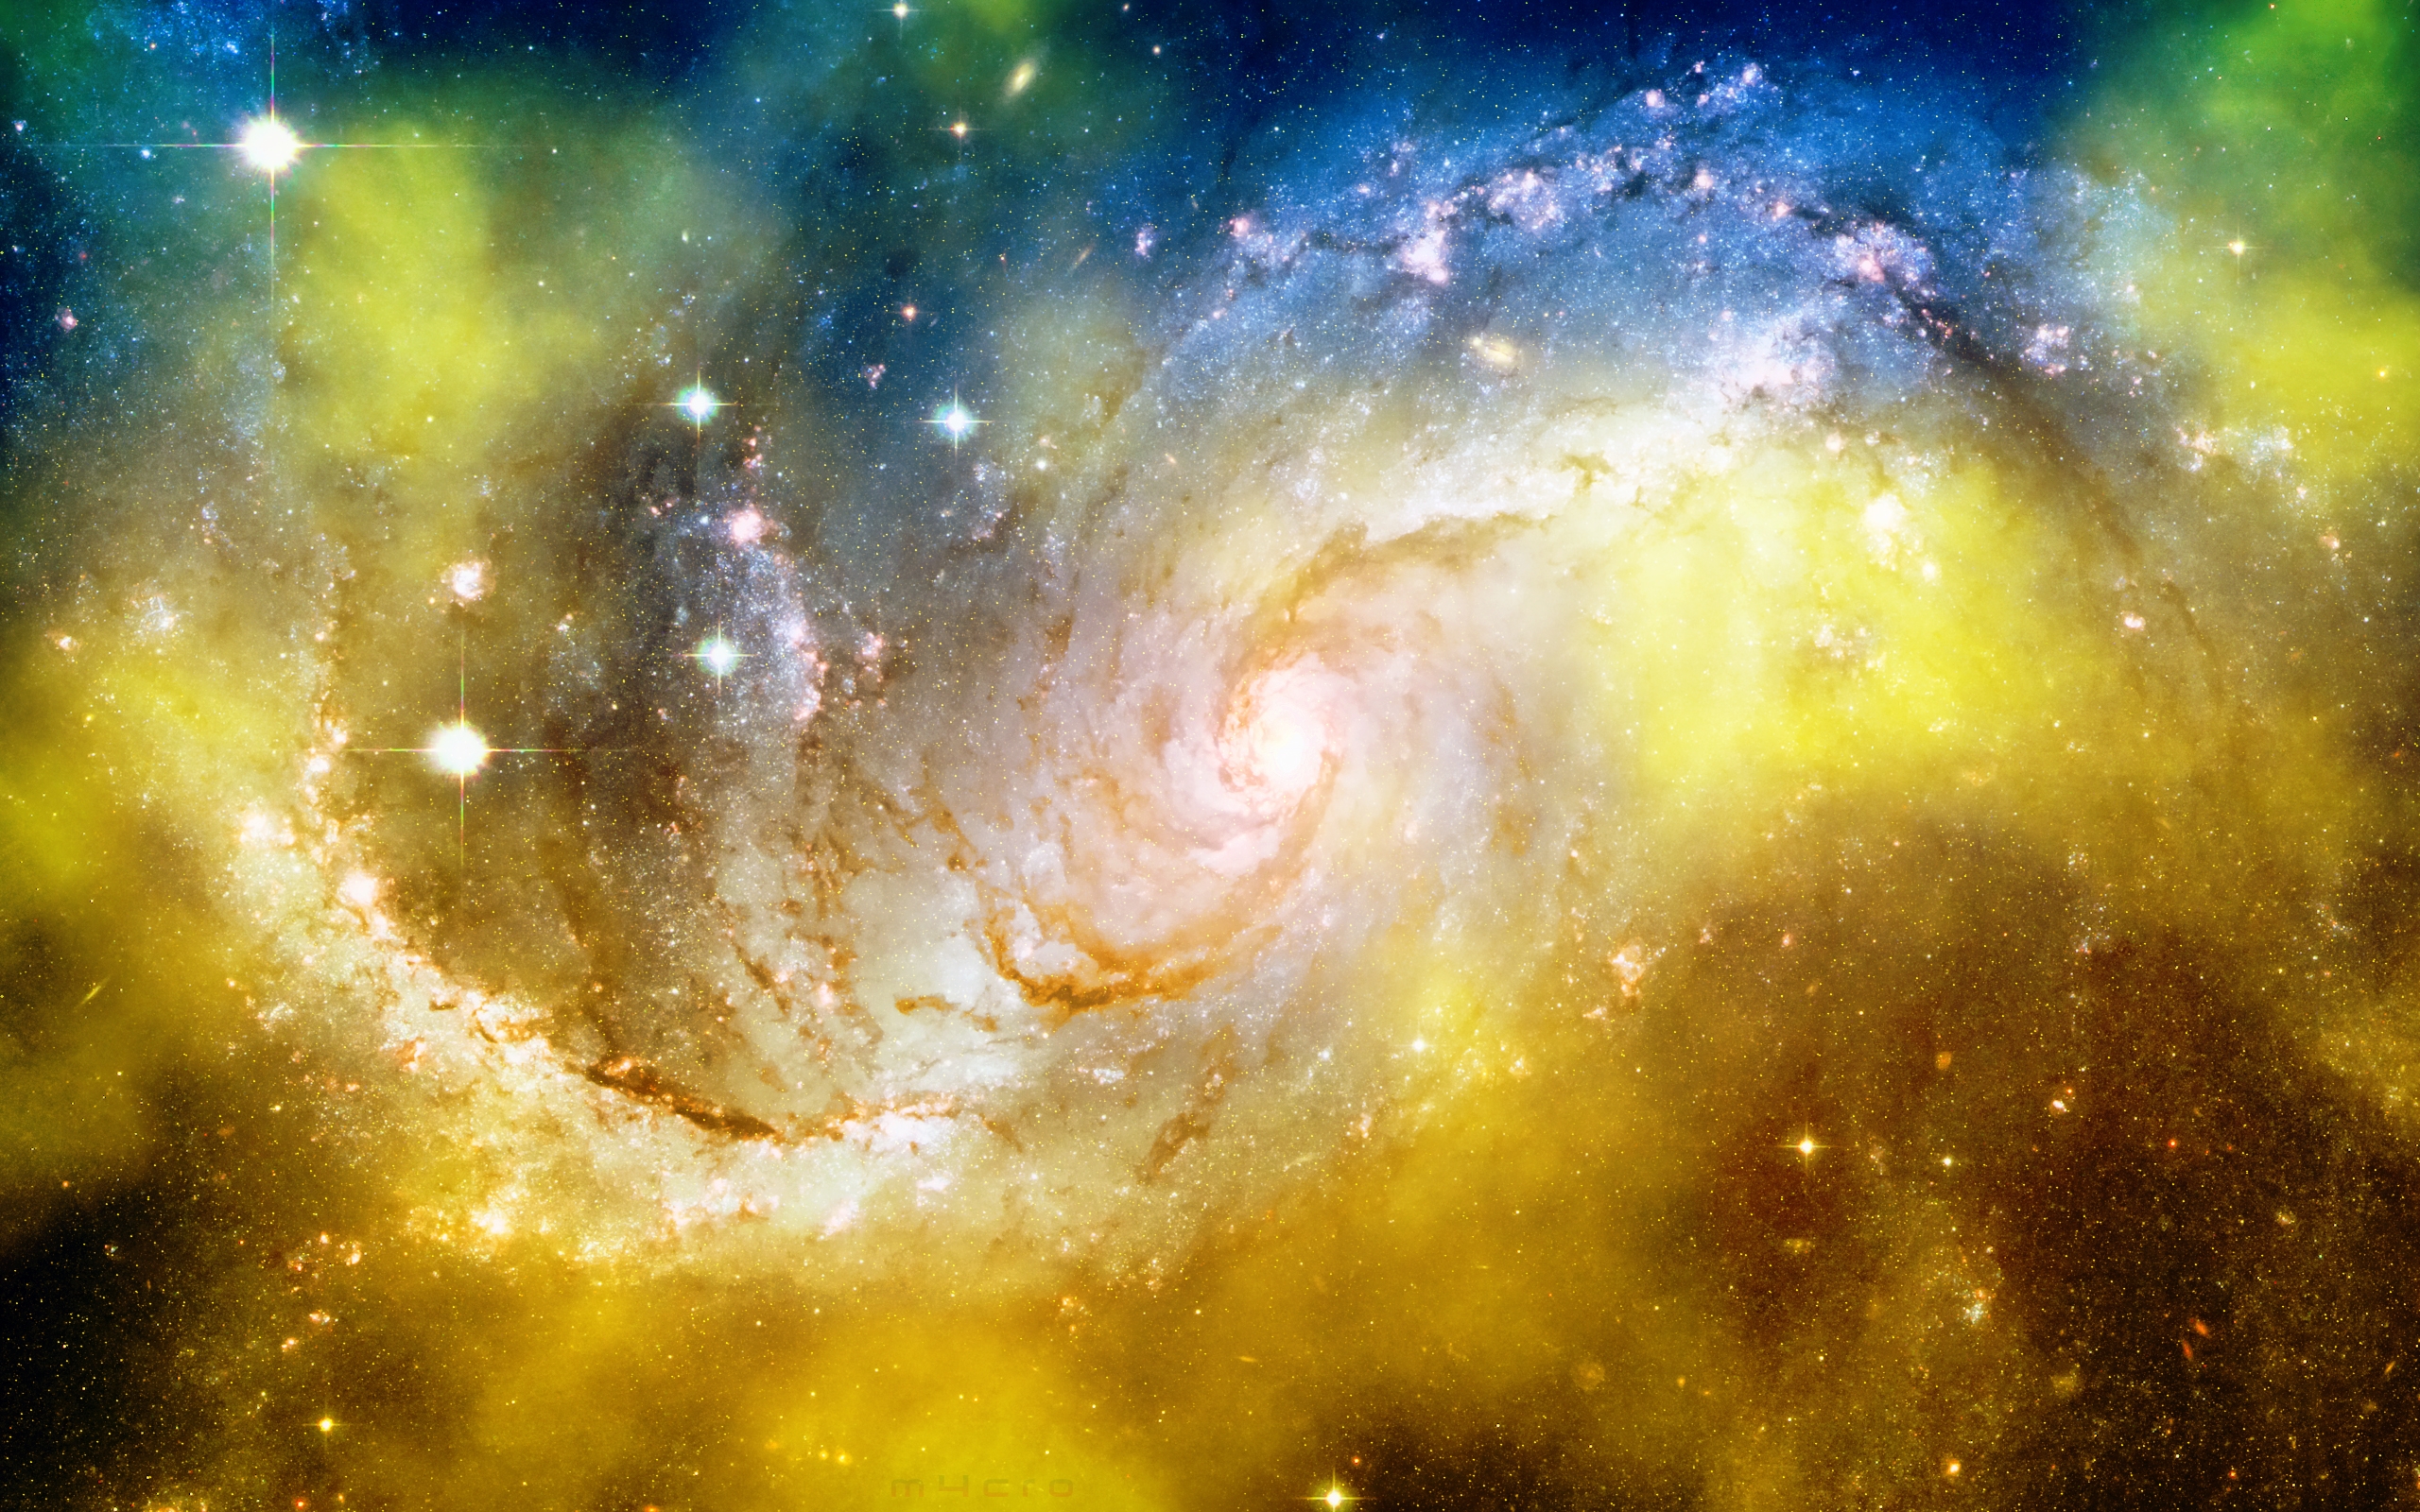 Colorful Galaxy Wallpaper 82 images